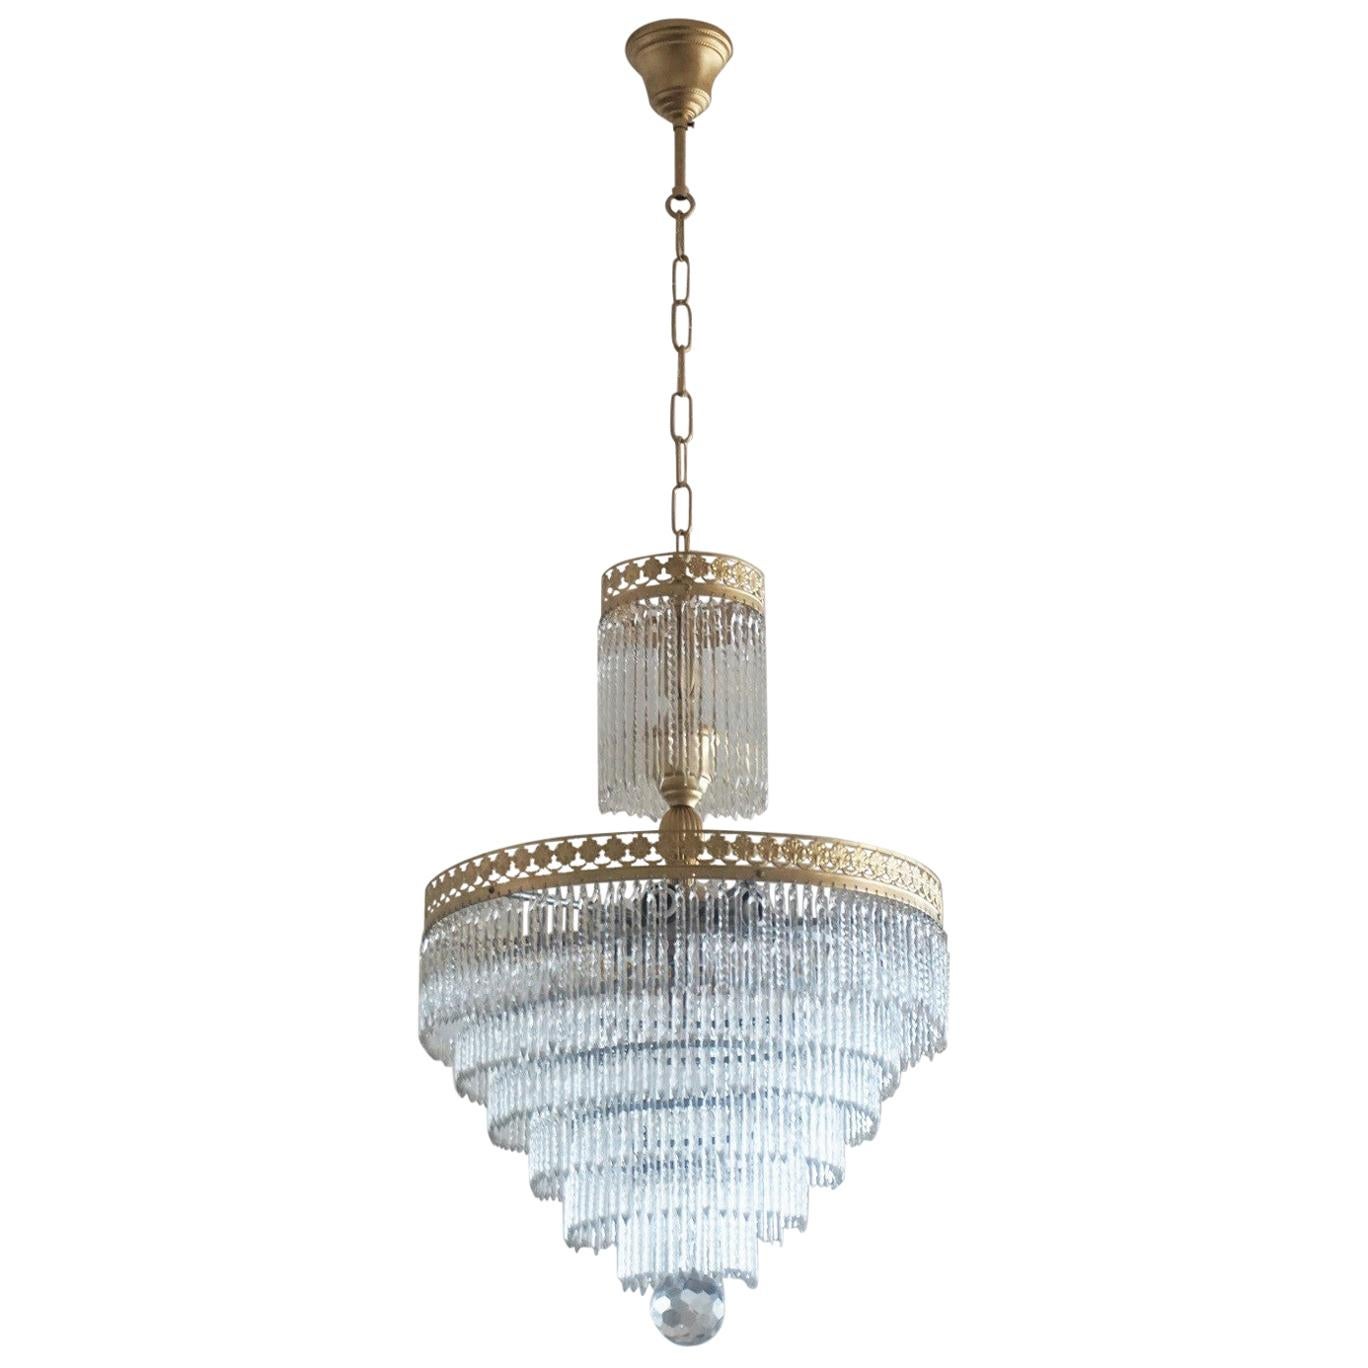 A wonderful brass and crystal waterfall flushmount or chandelier with seven tiers Murano crystal sticks, Italy 1950-1959 - impressive lighting effect!
This chandelier is in very good condition, rewired, all crystal sticks cleaned to its original